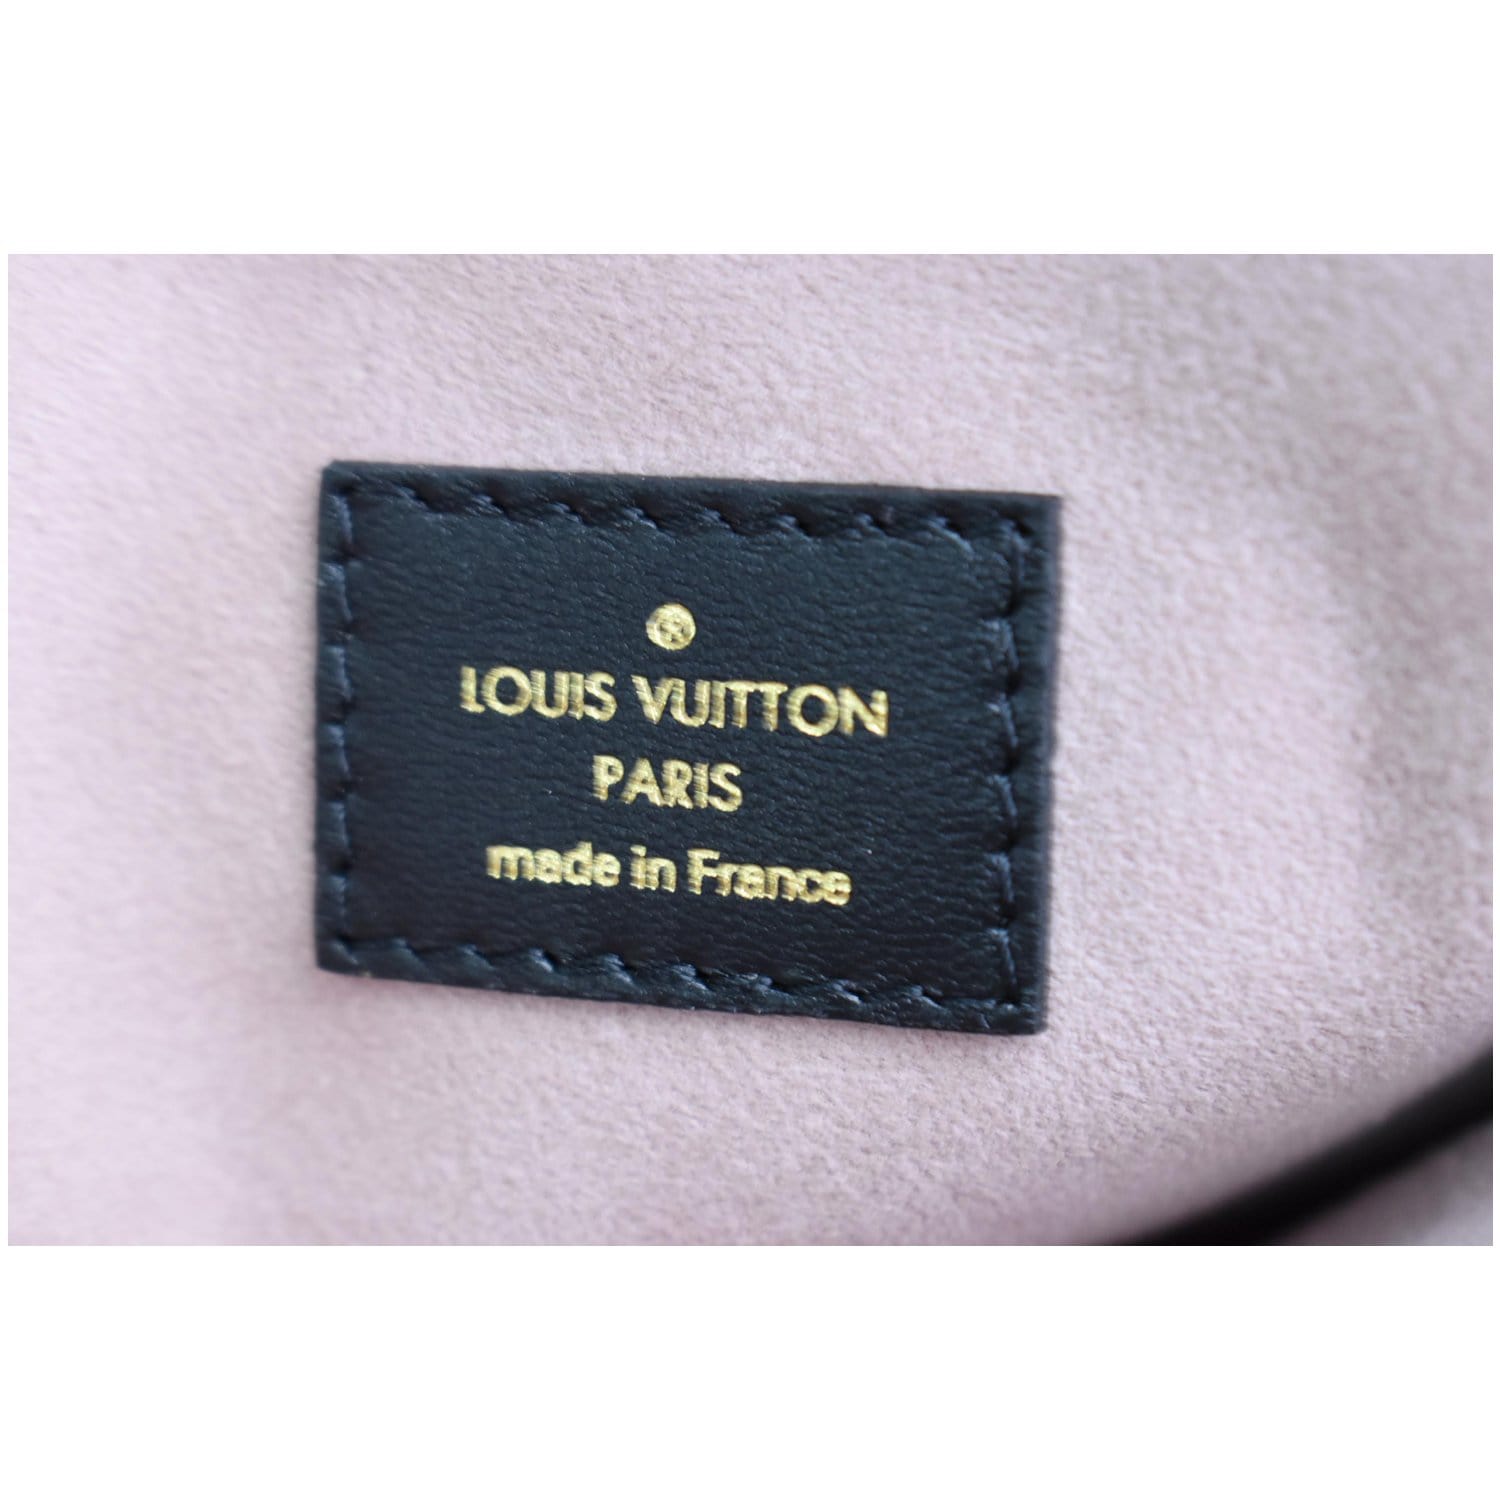 Unbox Louis Vuitton COUSSIN PM  Concerns w/Color Transfer, Noted